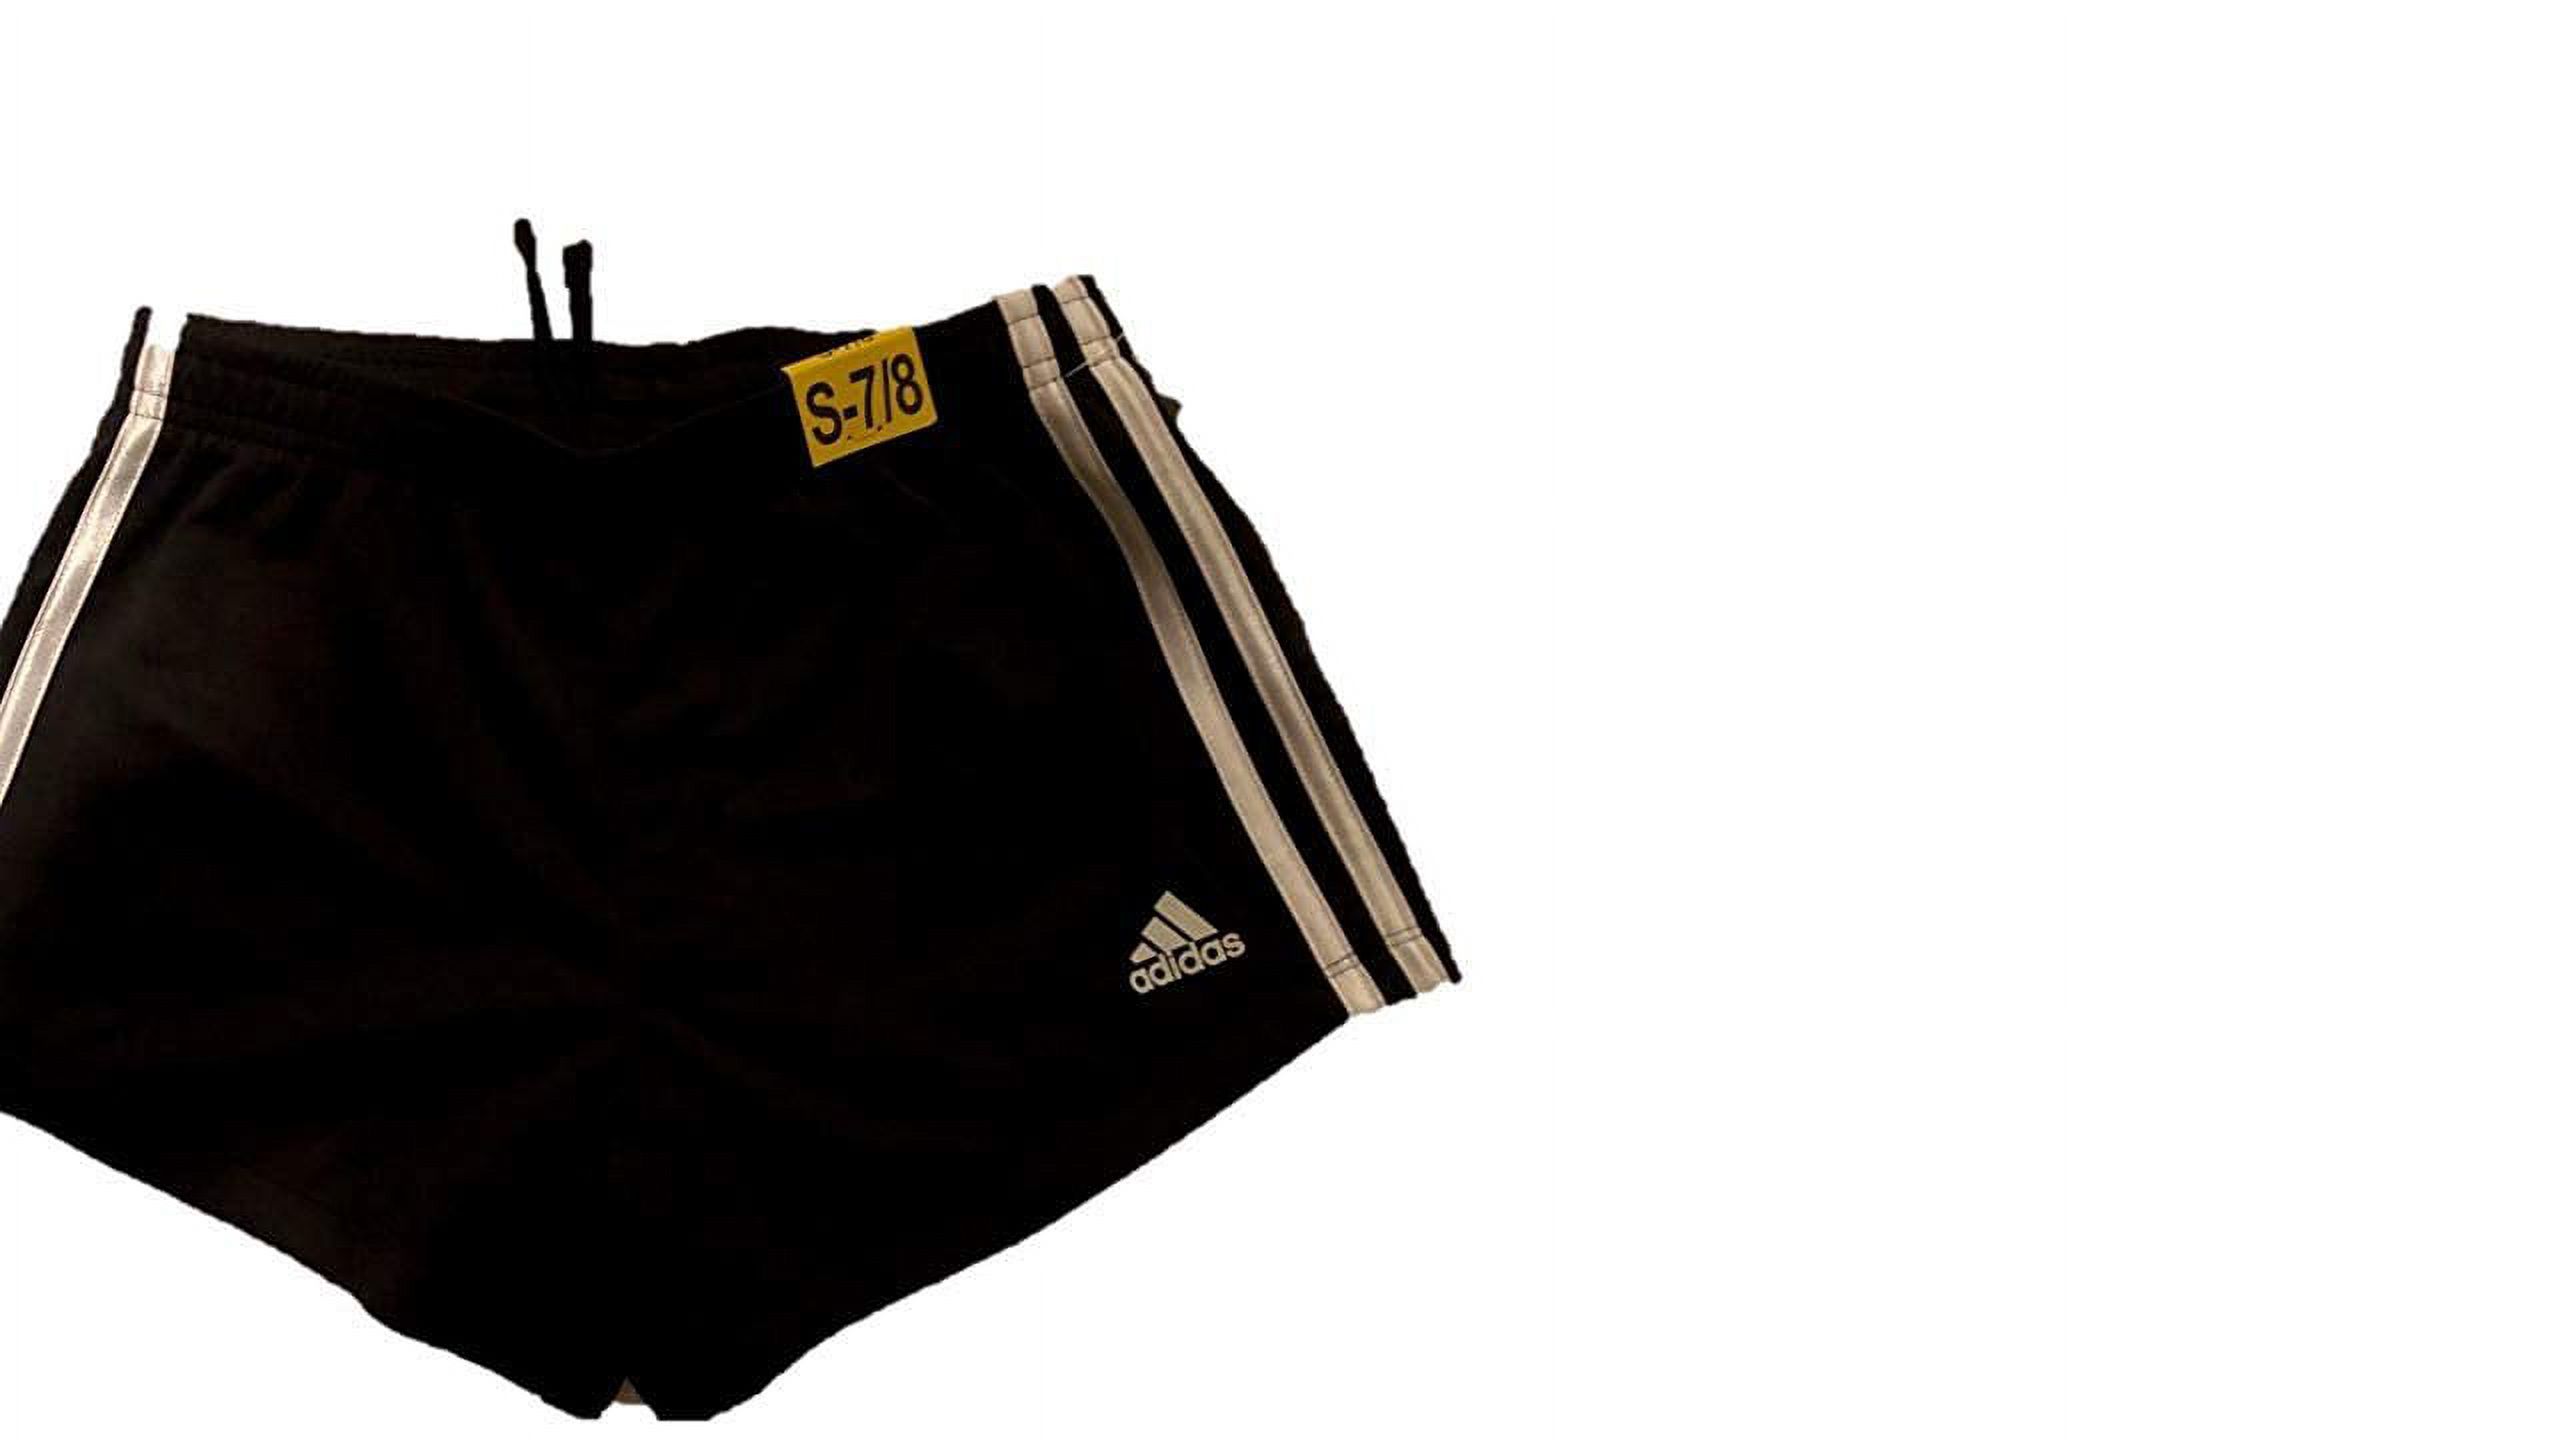 adidas Girls Youth Core Athletic Short Black, Small-7/8 - image 2 of 2